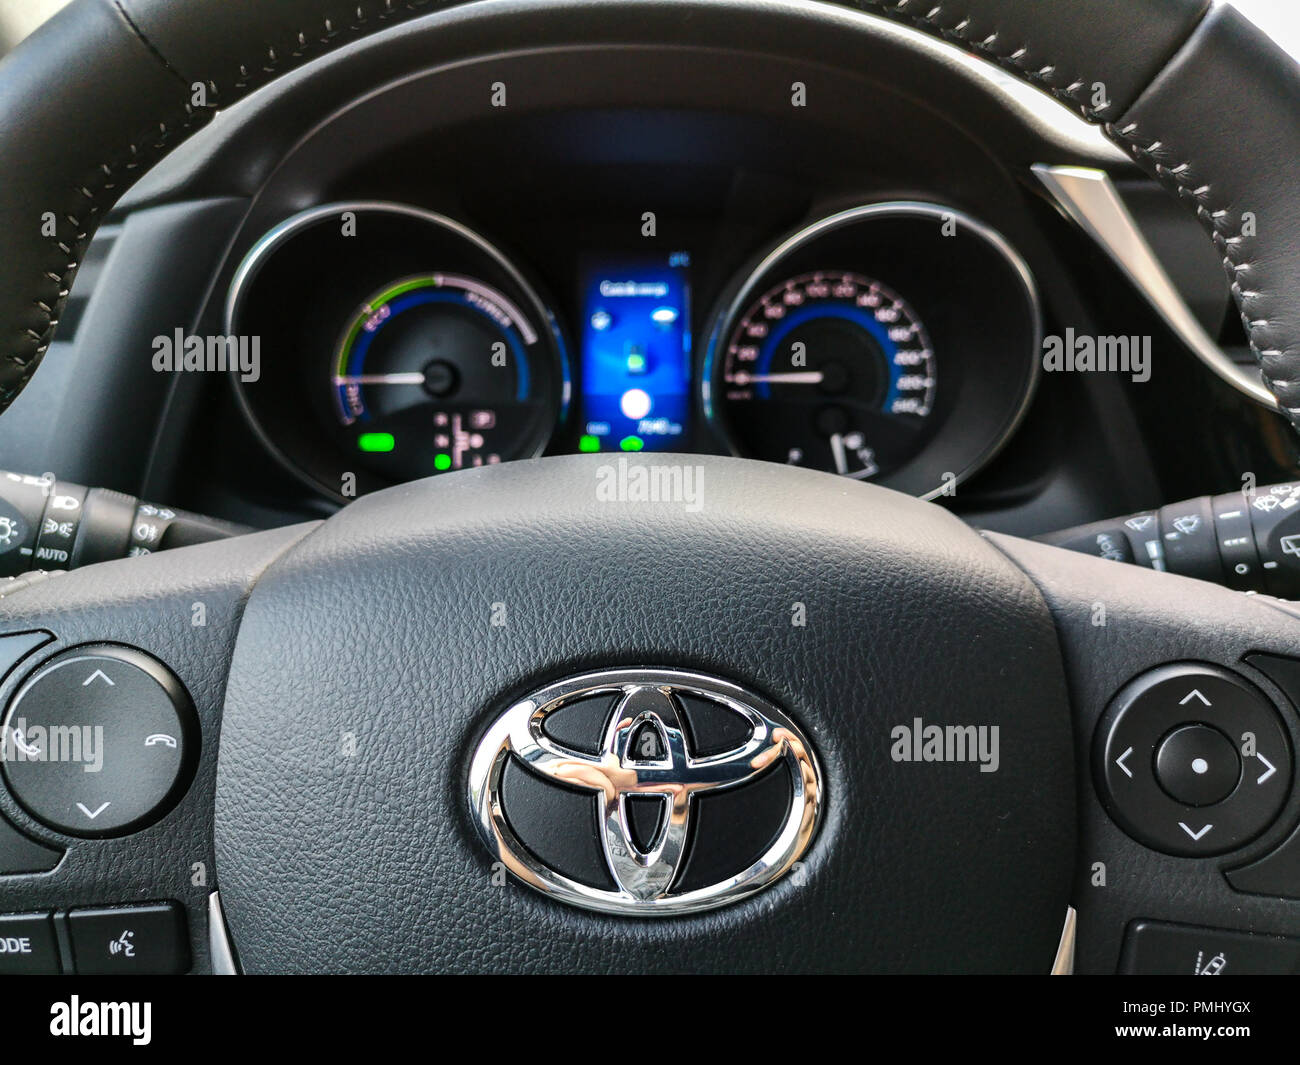 toyota steering wheel controls and car dashboard Stock Photo - Alamy